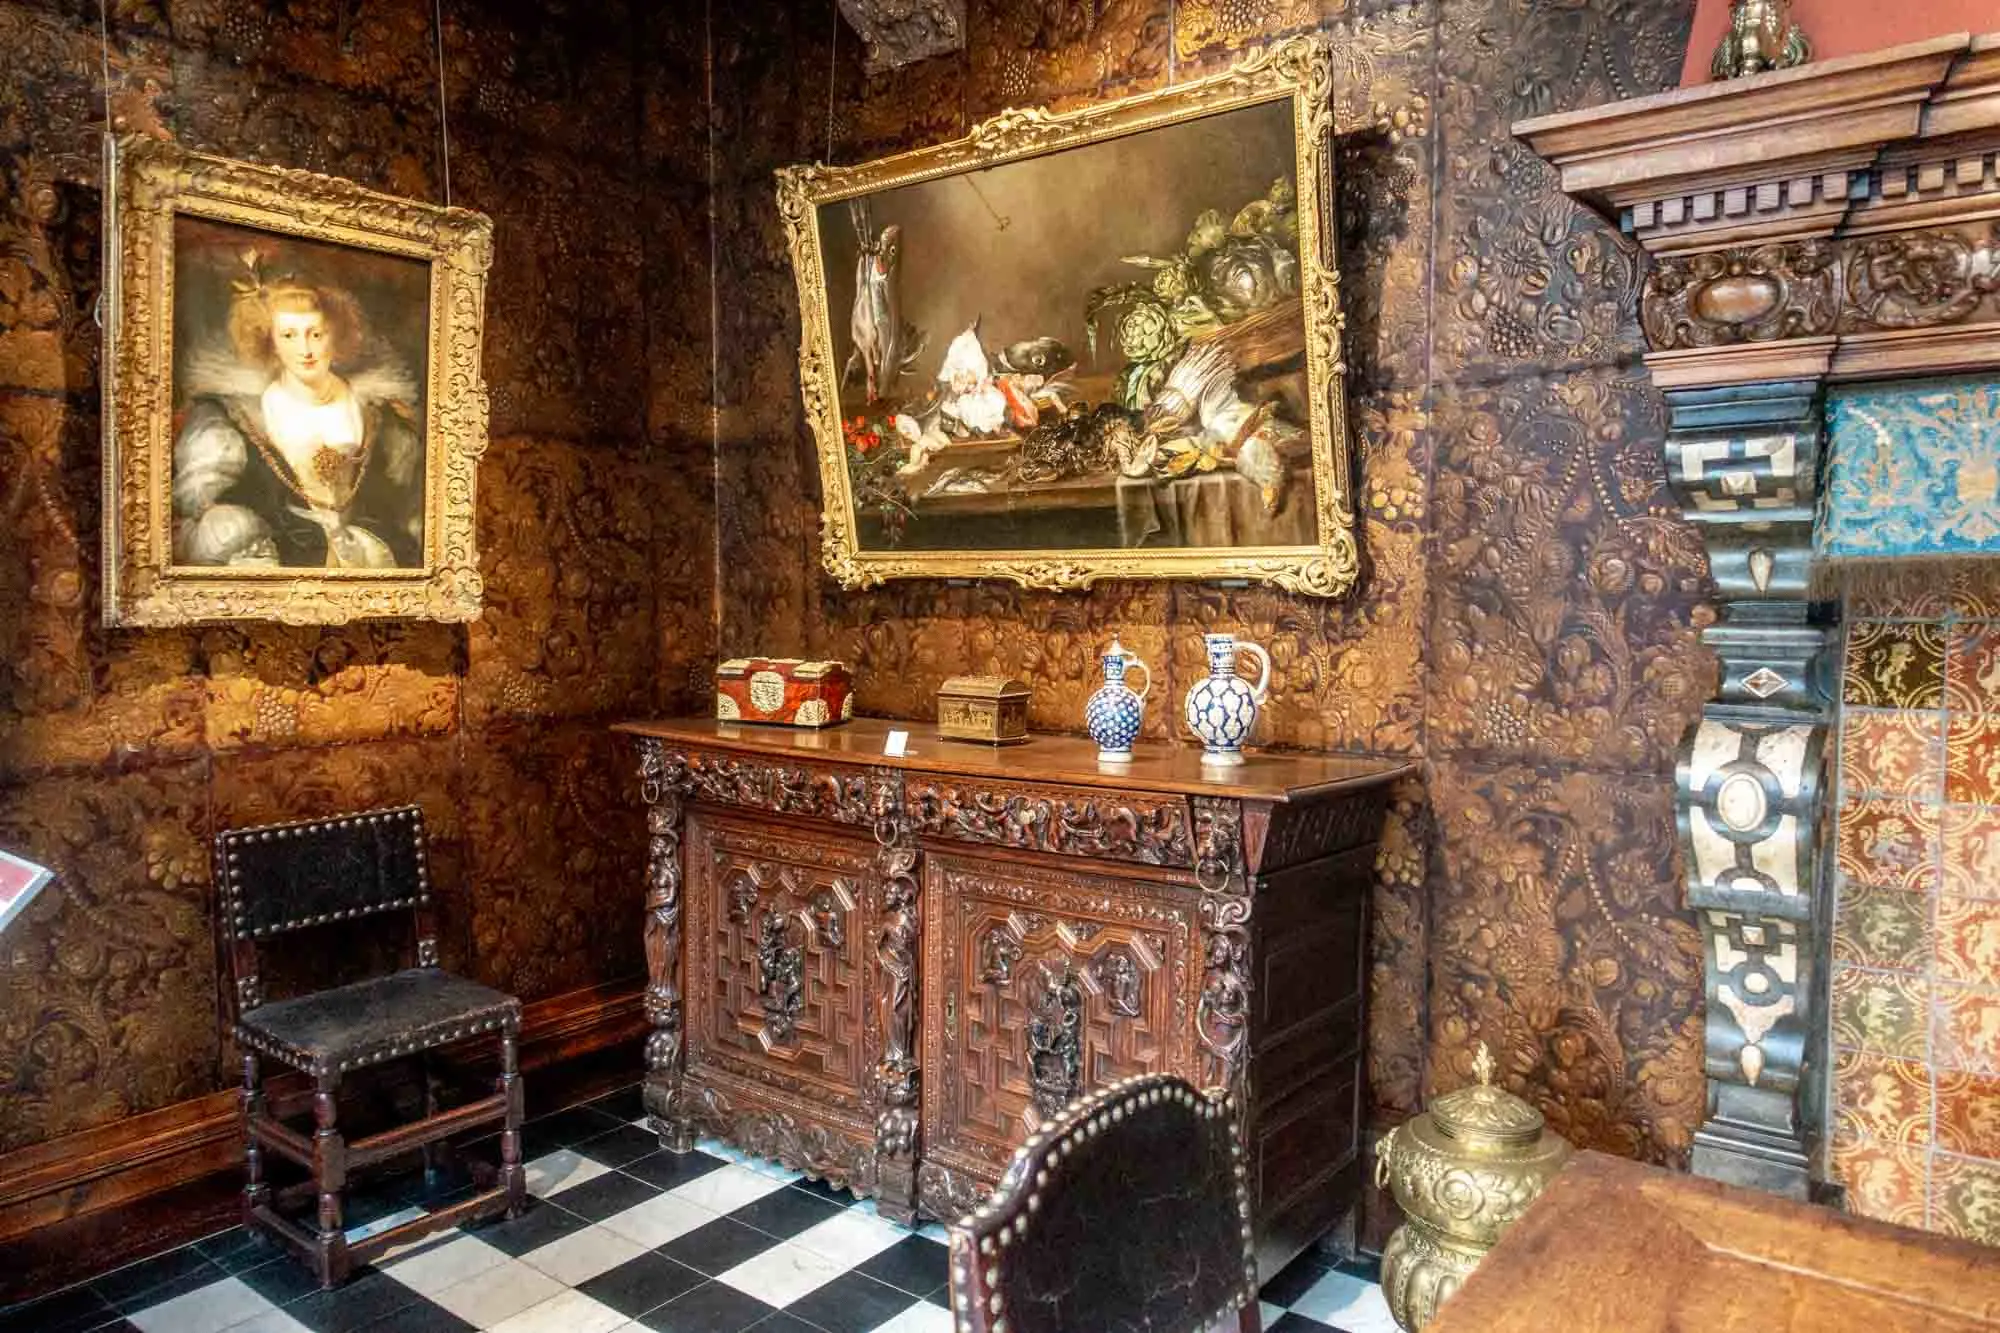 Ornate room with embossed leather wall coverings and Baroque paintings